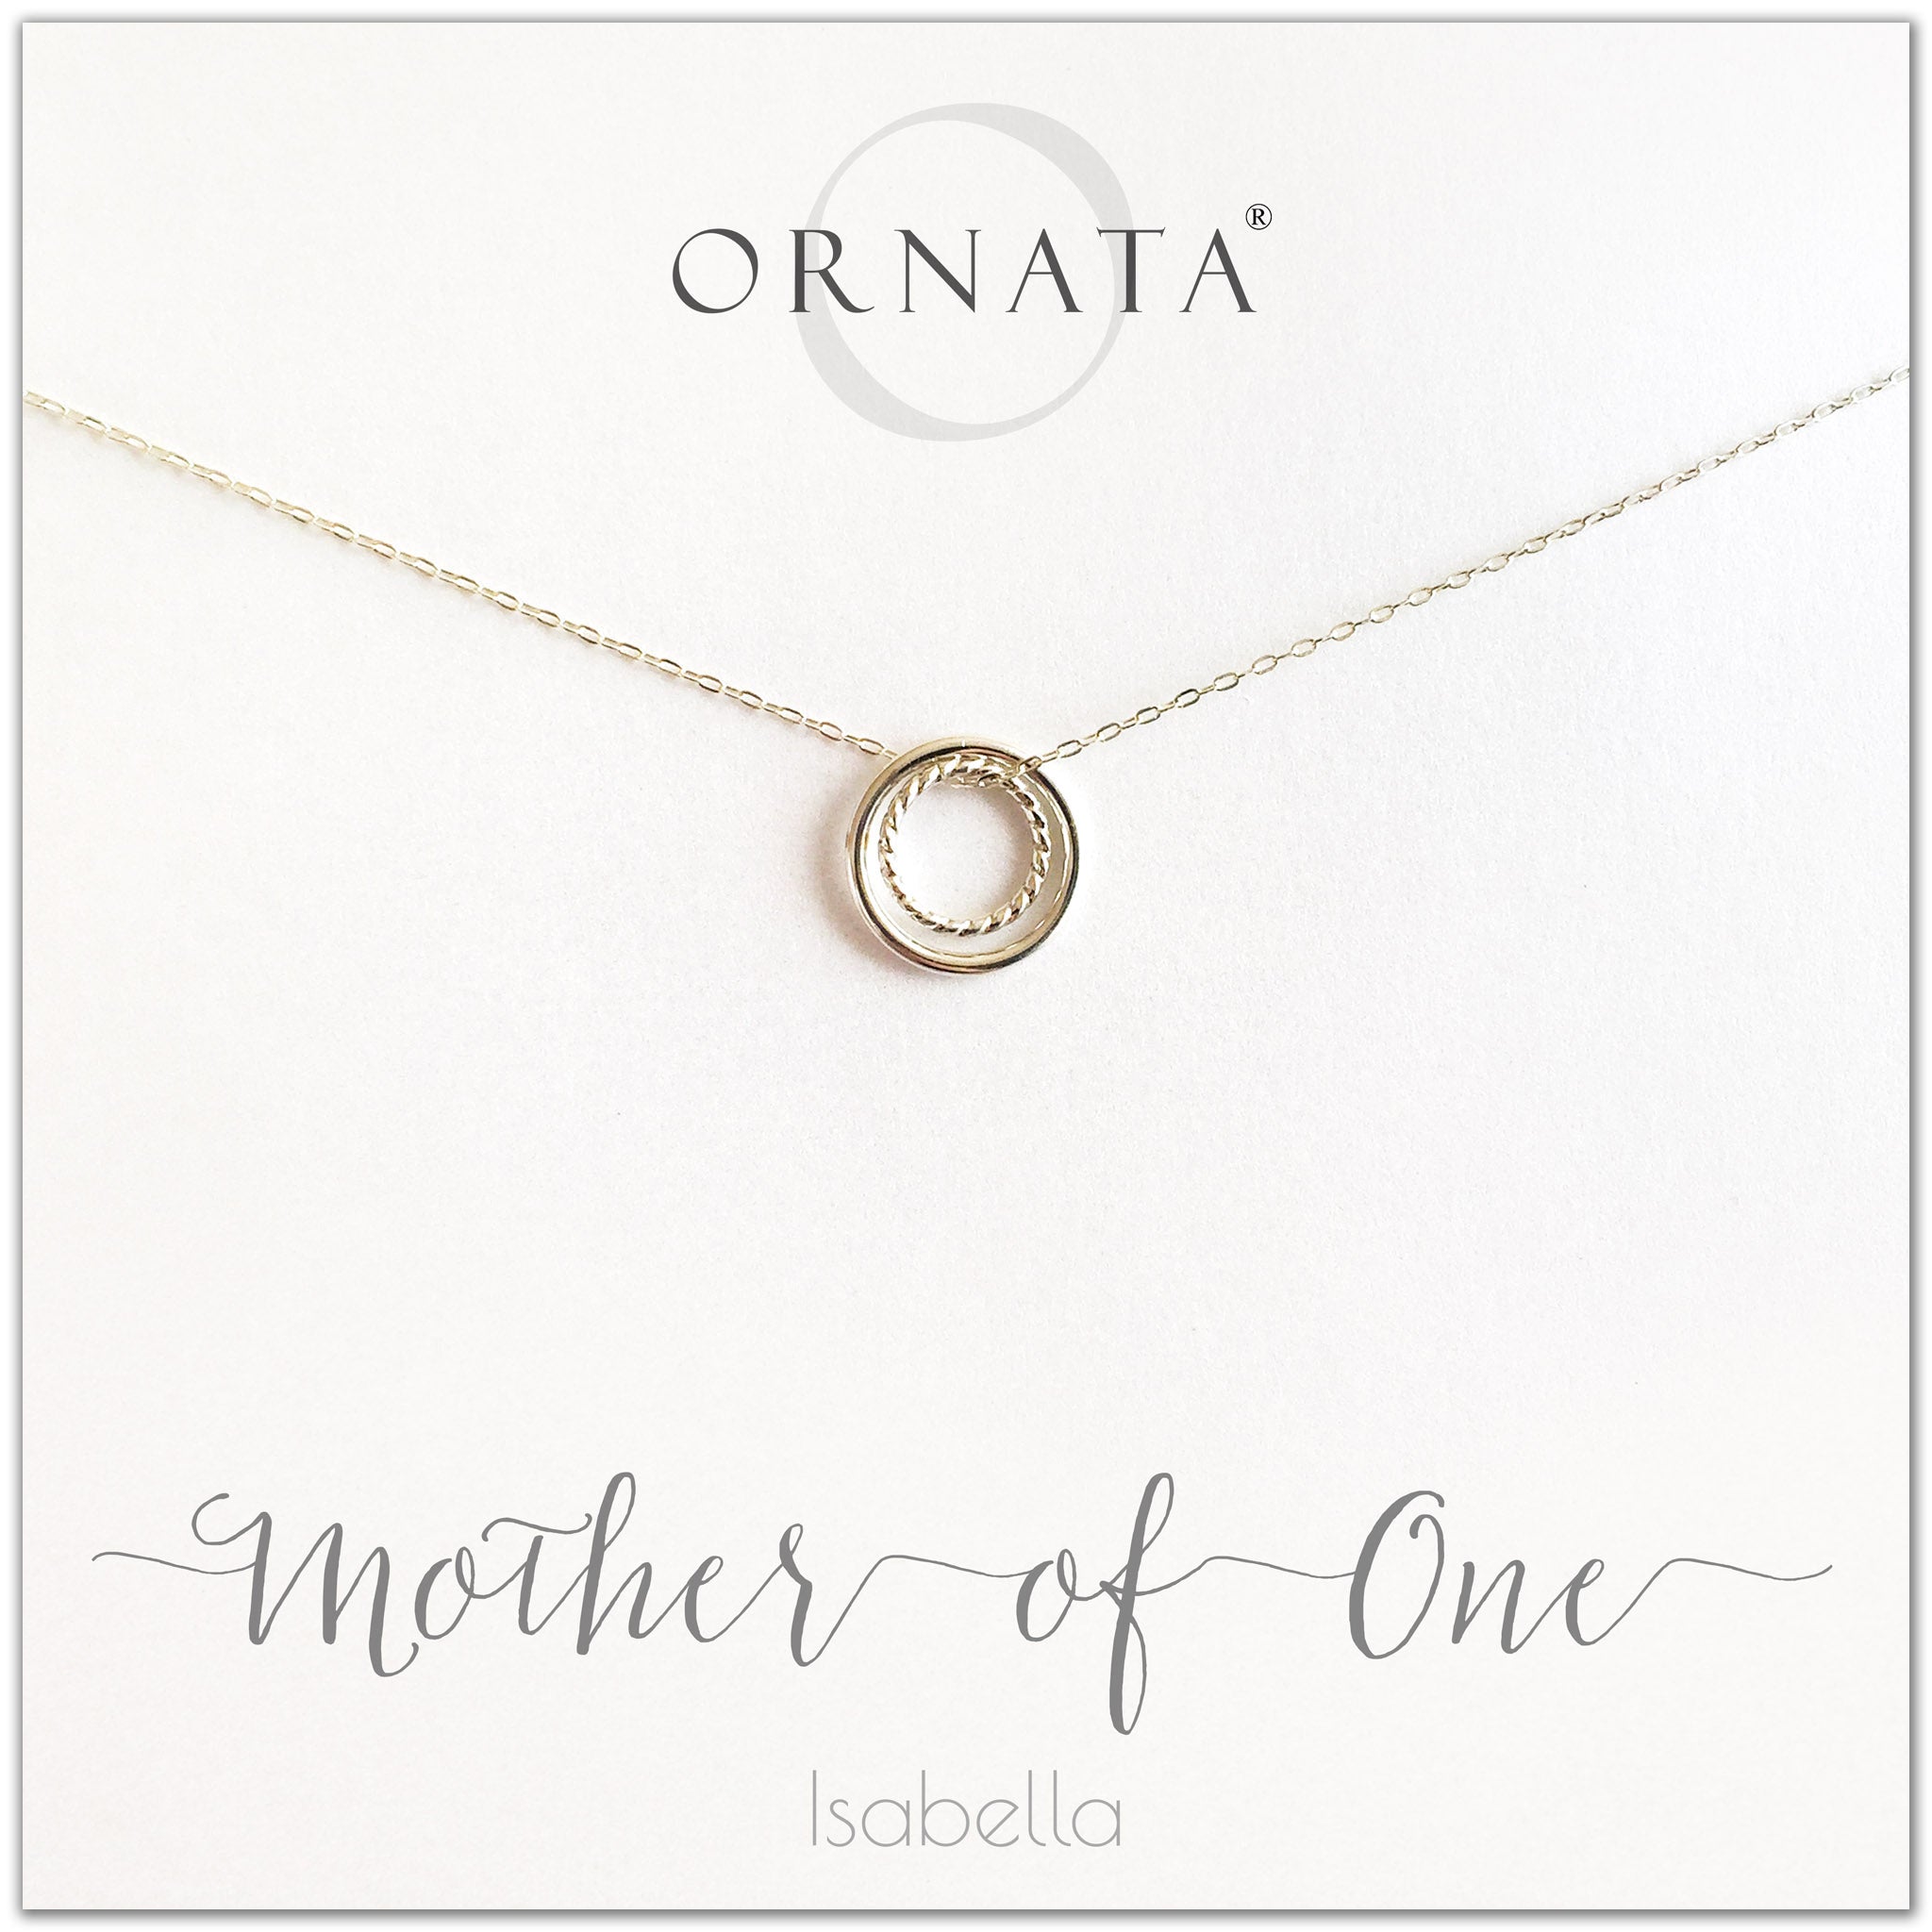 Mom or Mother of One - personalized silver necklaces. Our sterling silver custom jewelry is a perfect gift for mothers of one child, wives, or family members. Also a good gift for Mother’s Day. Delicate sterling silver interlocking rings represent a mother and child. 